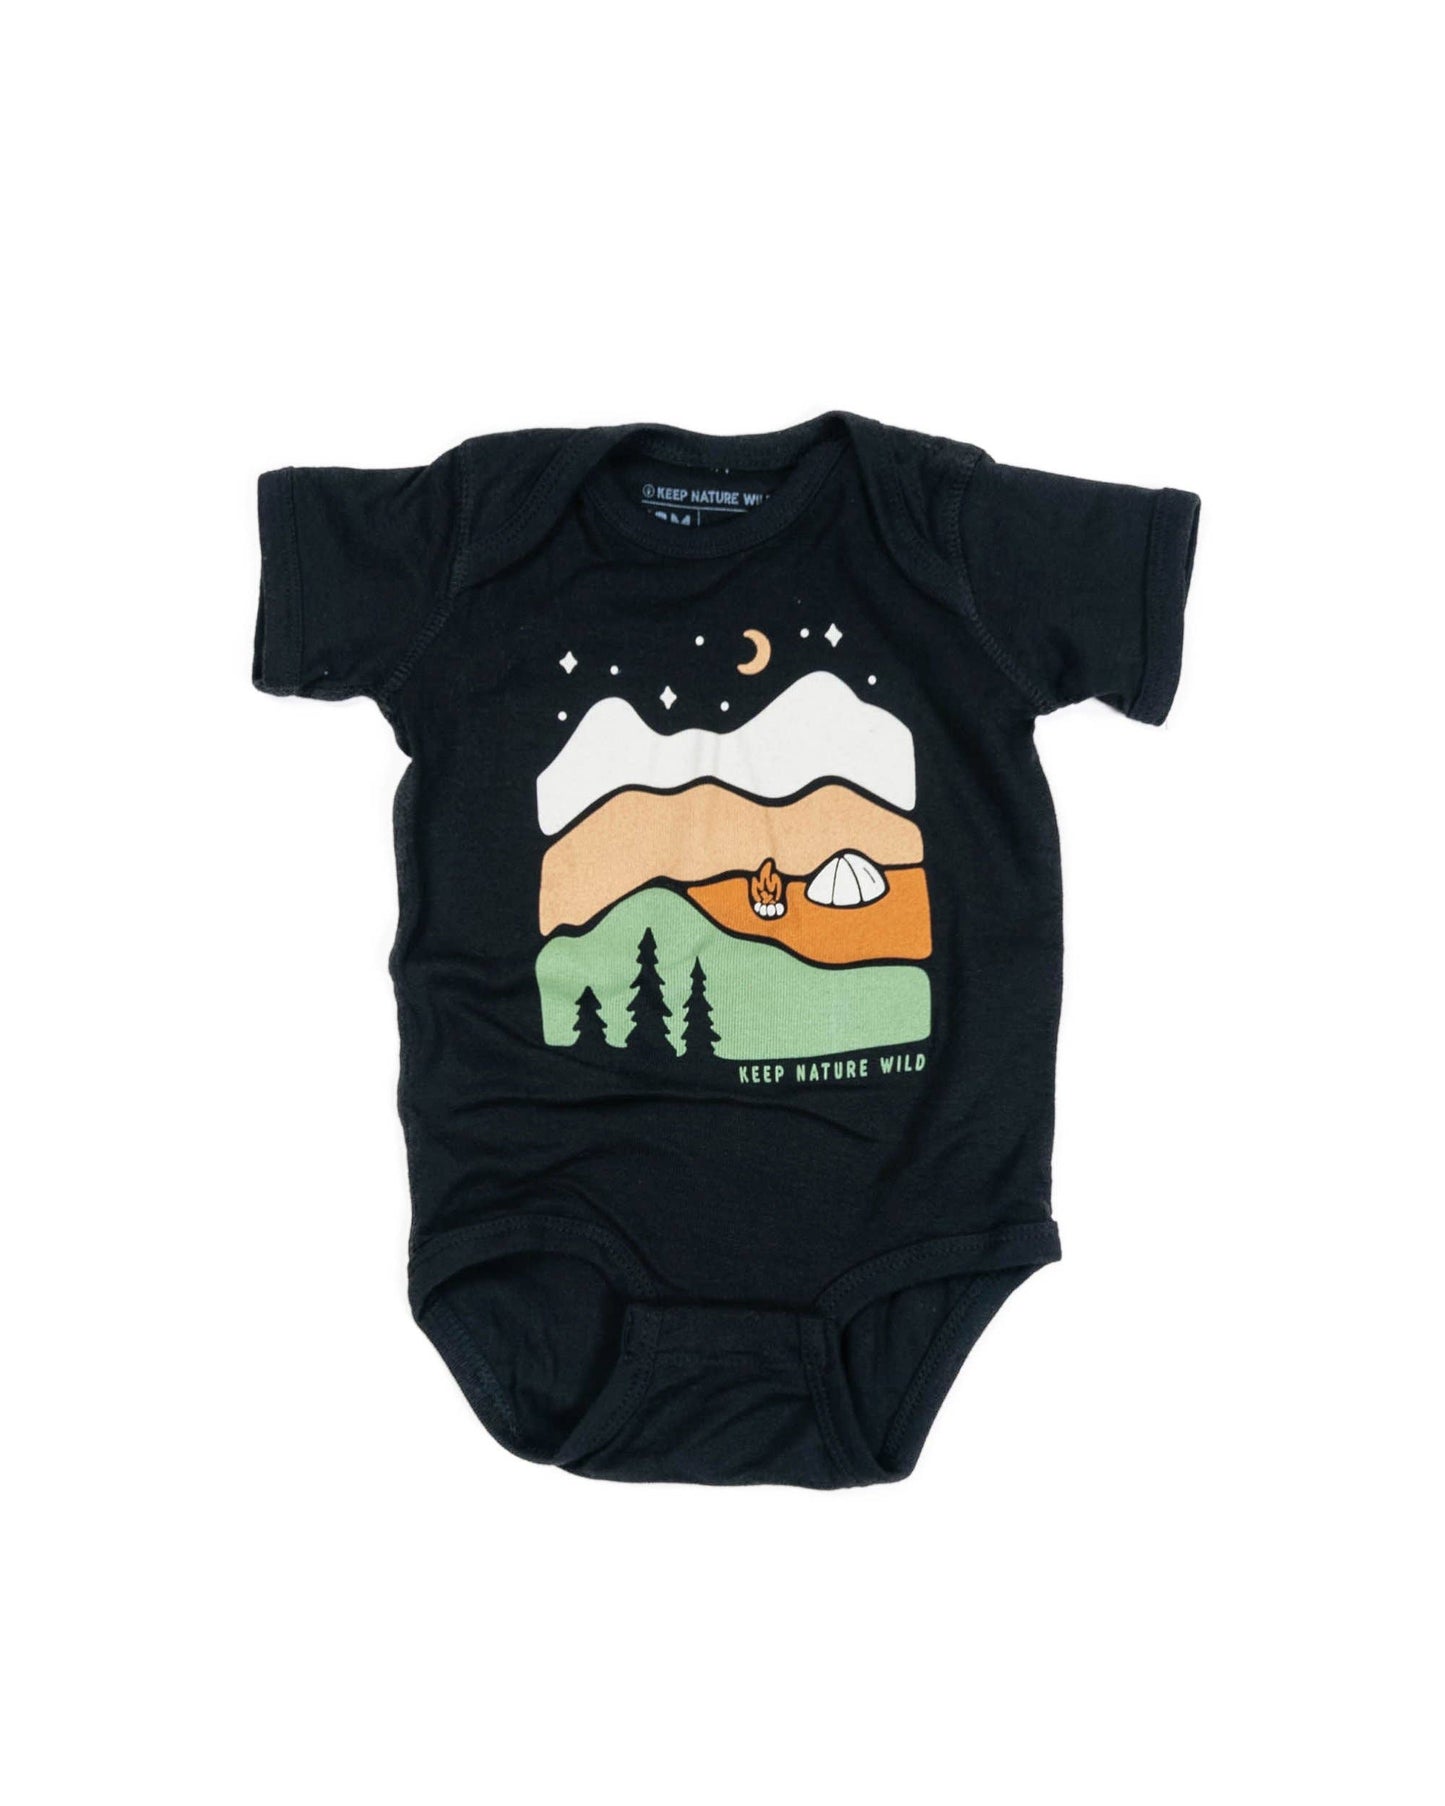 Black Better in the mountains onesie by Keep Nature Wild